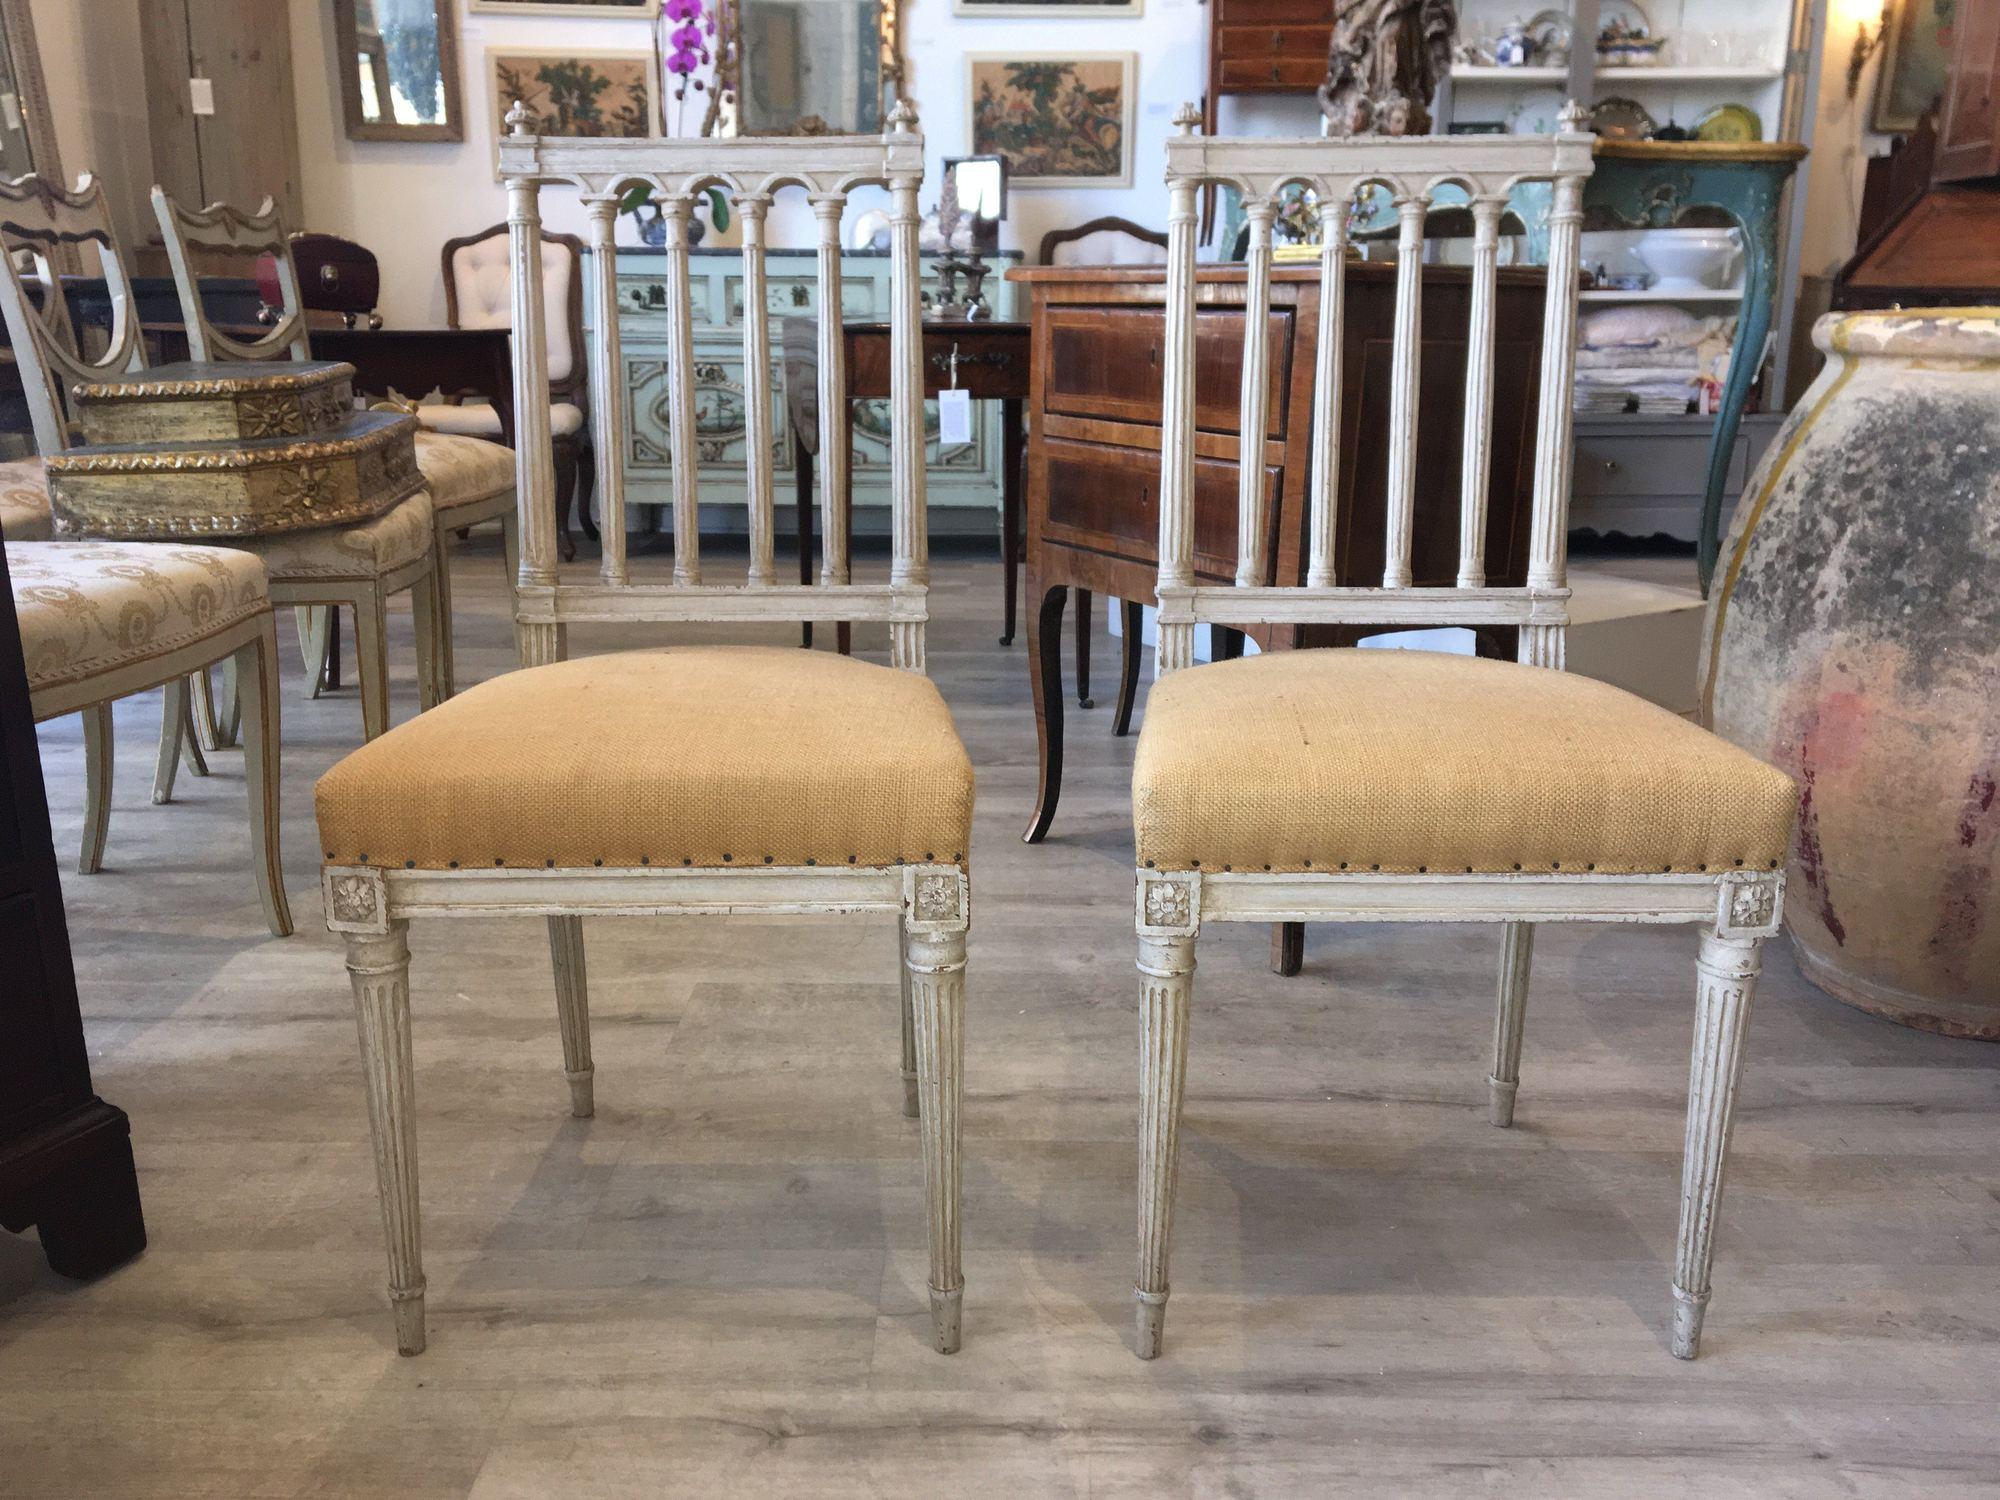 Pair of 19th century Louis XVI style French side chairs, white painted with charming fluted column backrest over a burlap-upholstered seat resting on tapered fluted legs.